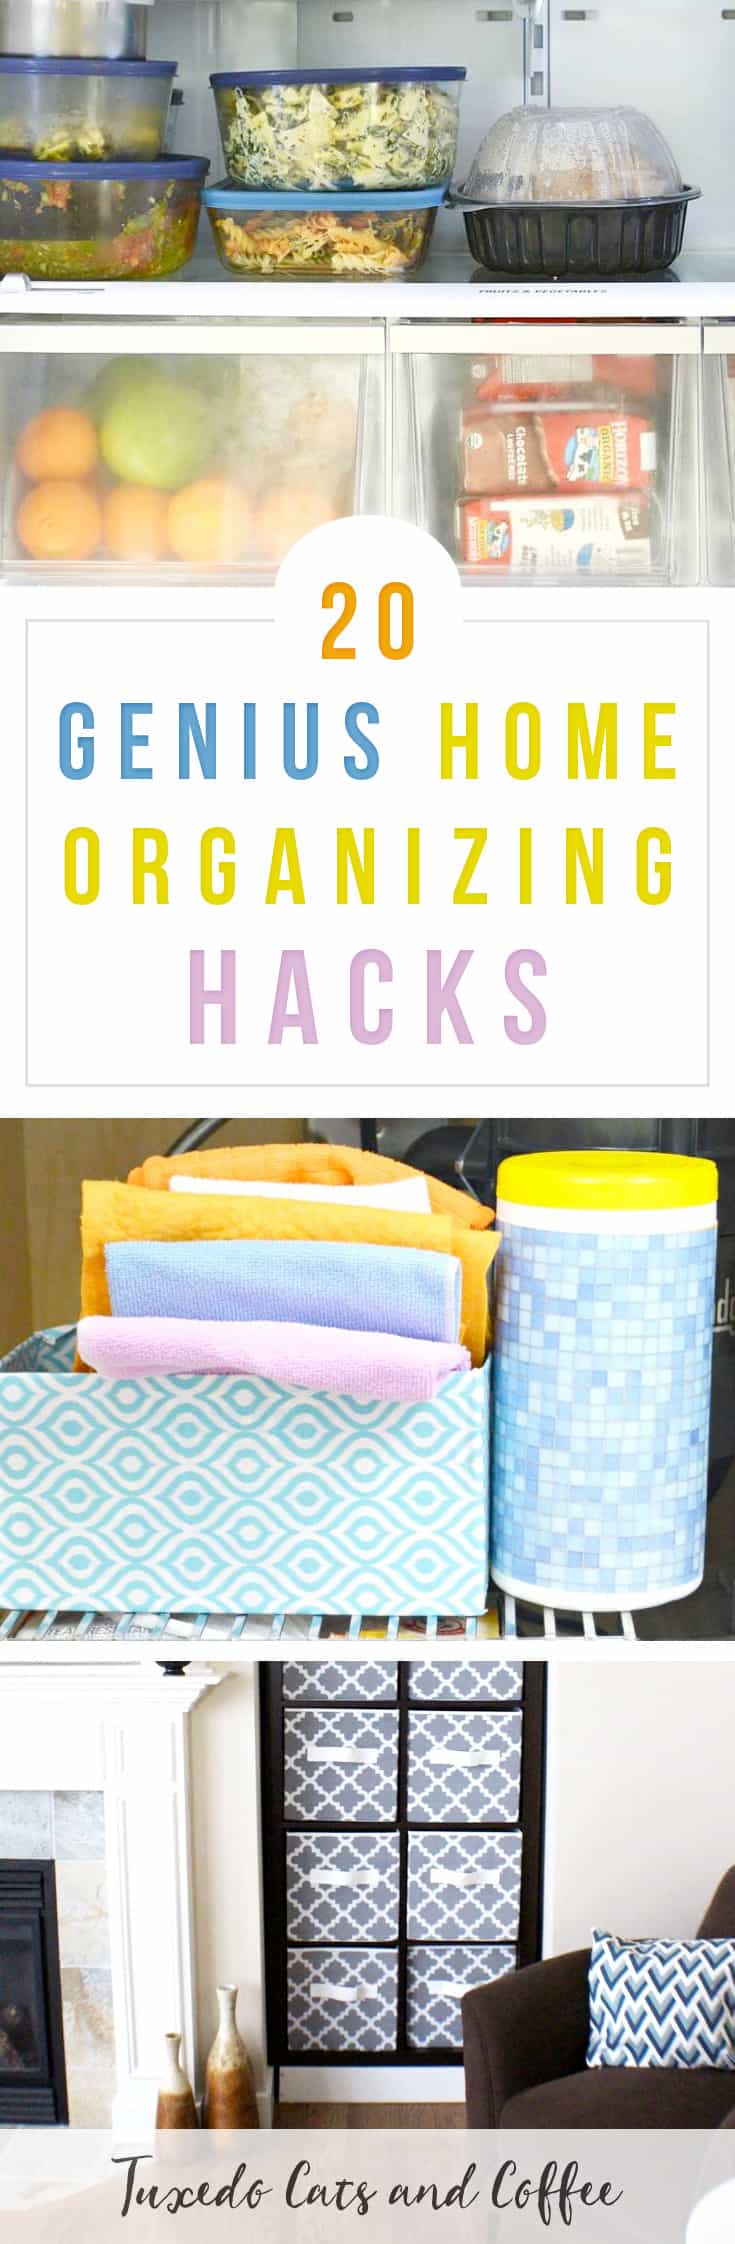 With spring upon us, it’s a great time to get organized and go through your house decluttering, downsizing, and learning how to organize your home. Here are 20 ways to organize your home, as well as tips, project ideas, and more.